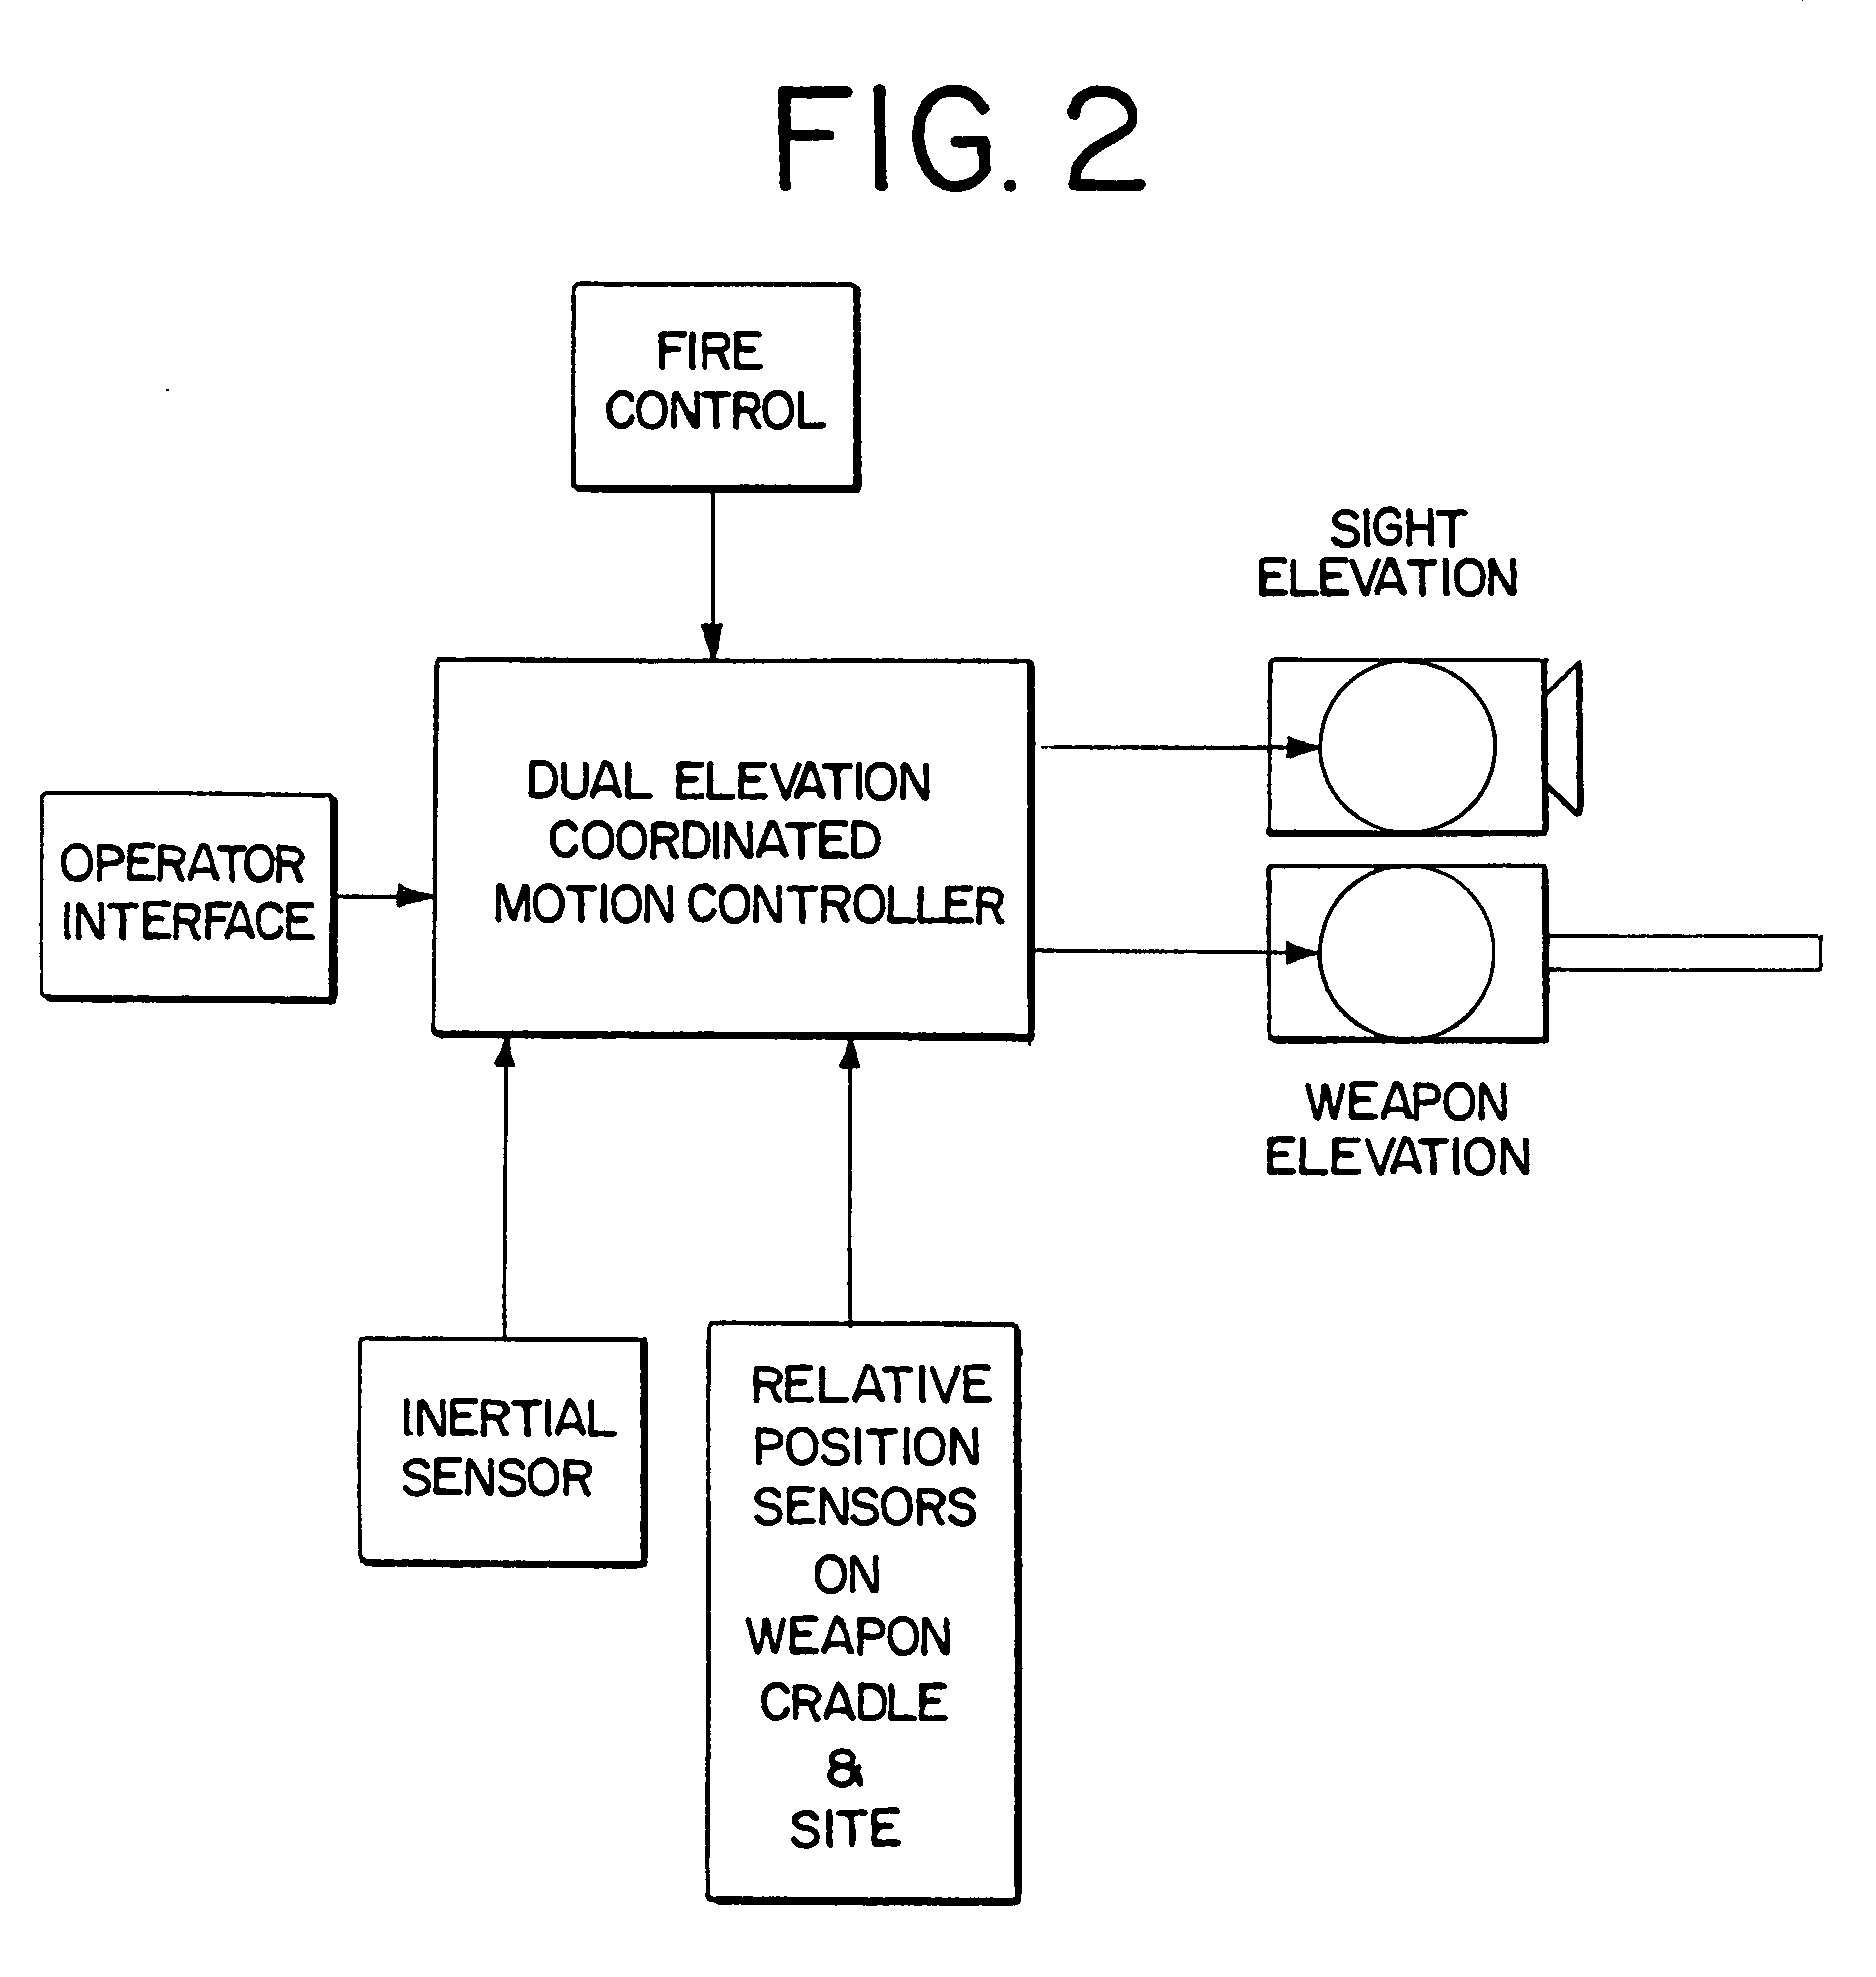 Dual elevation weapon station and method of use